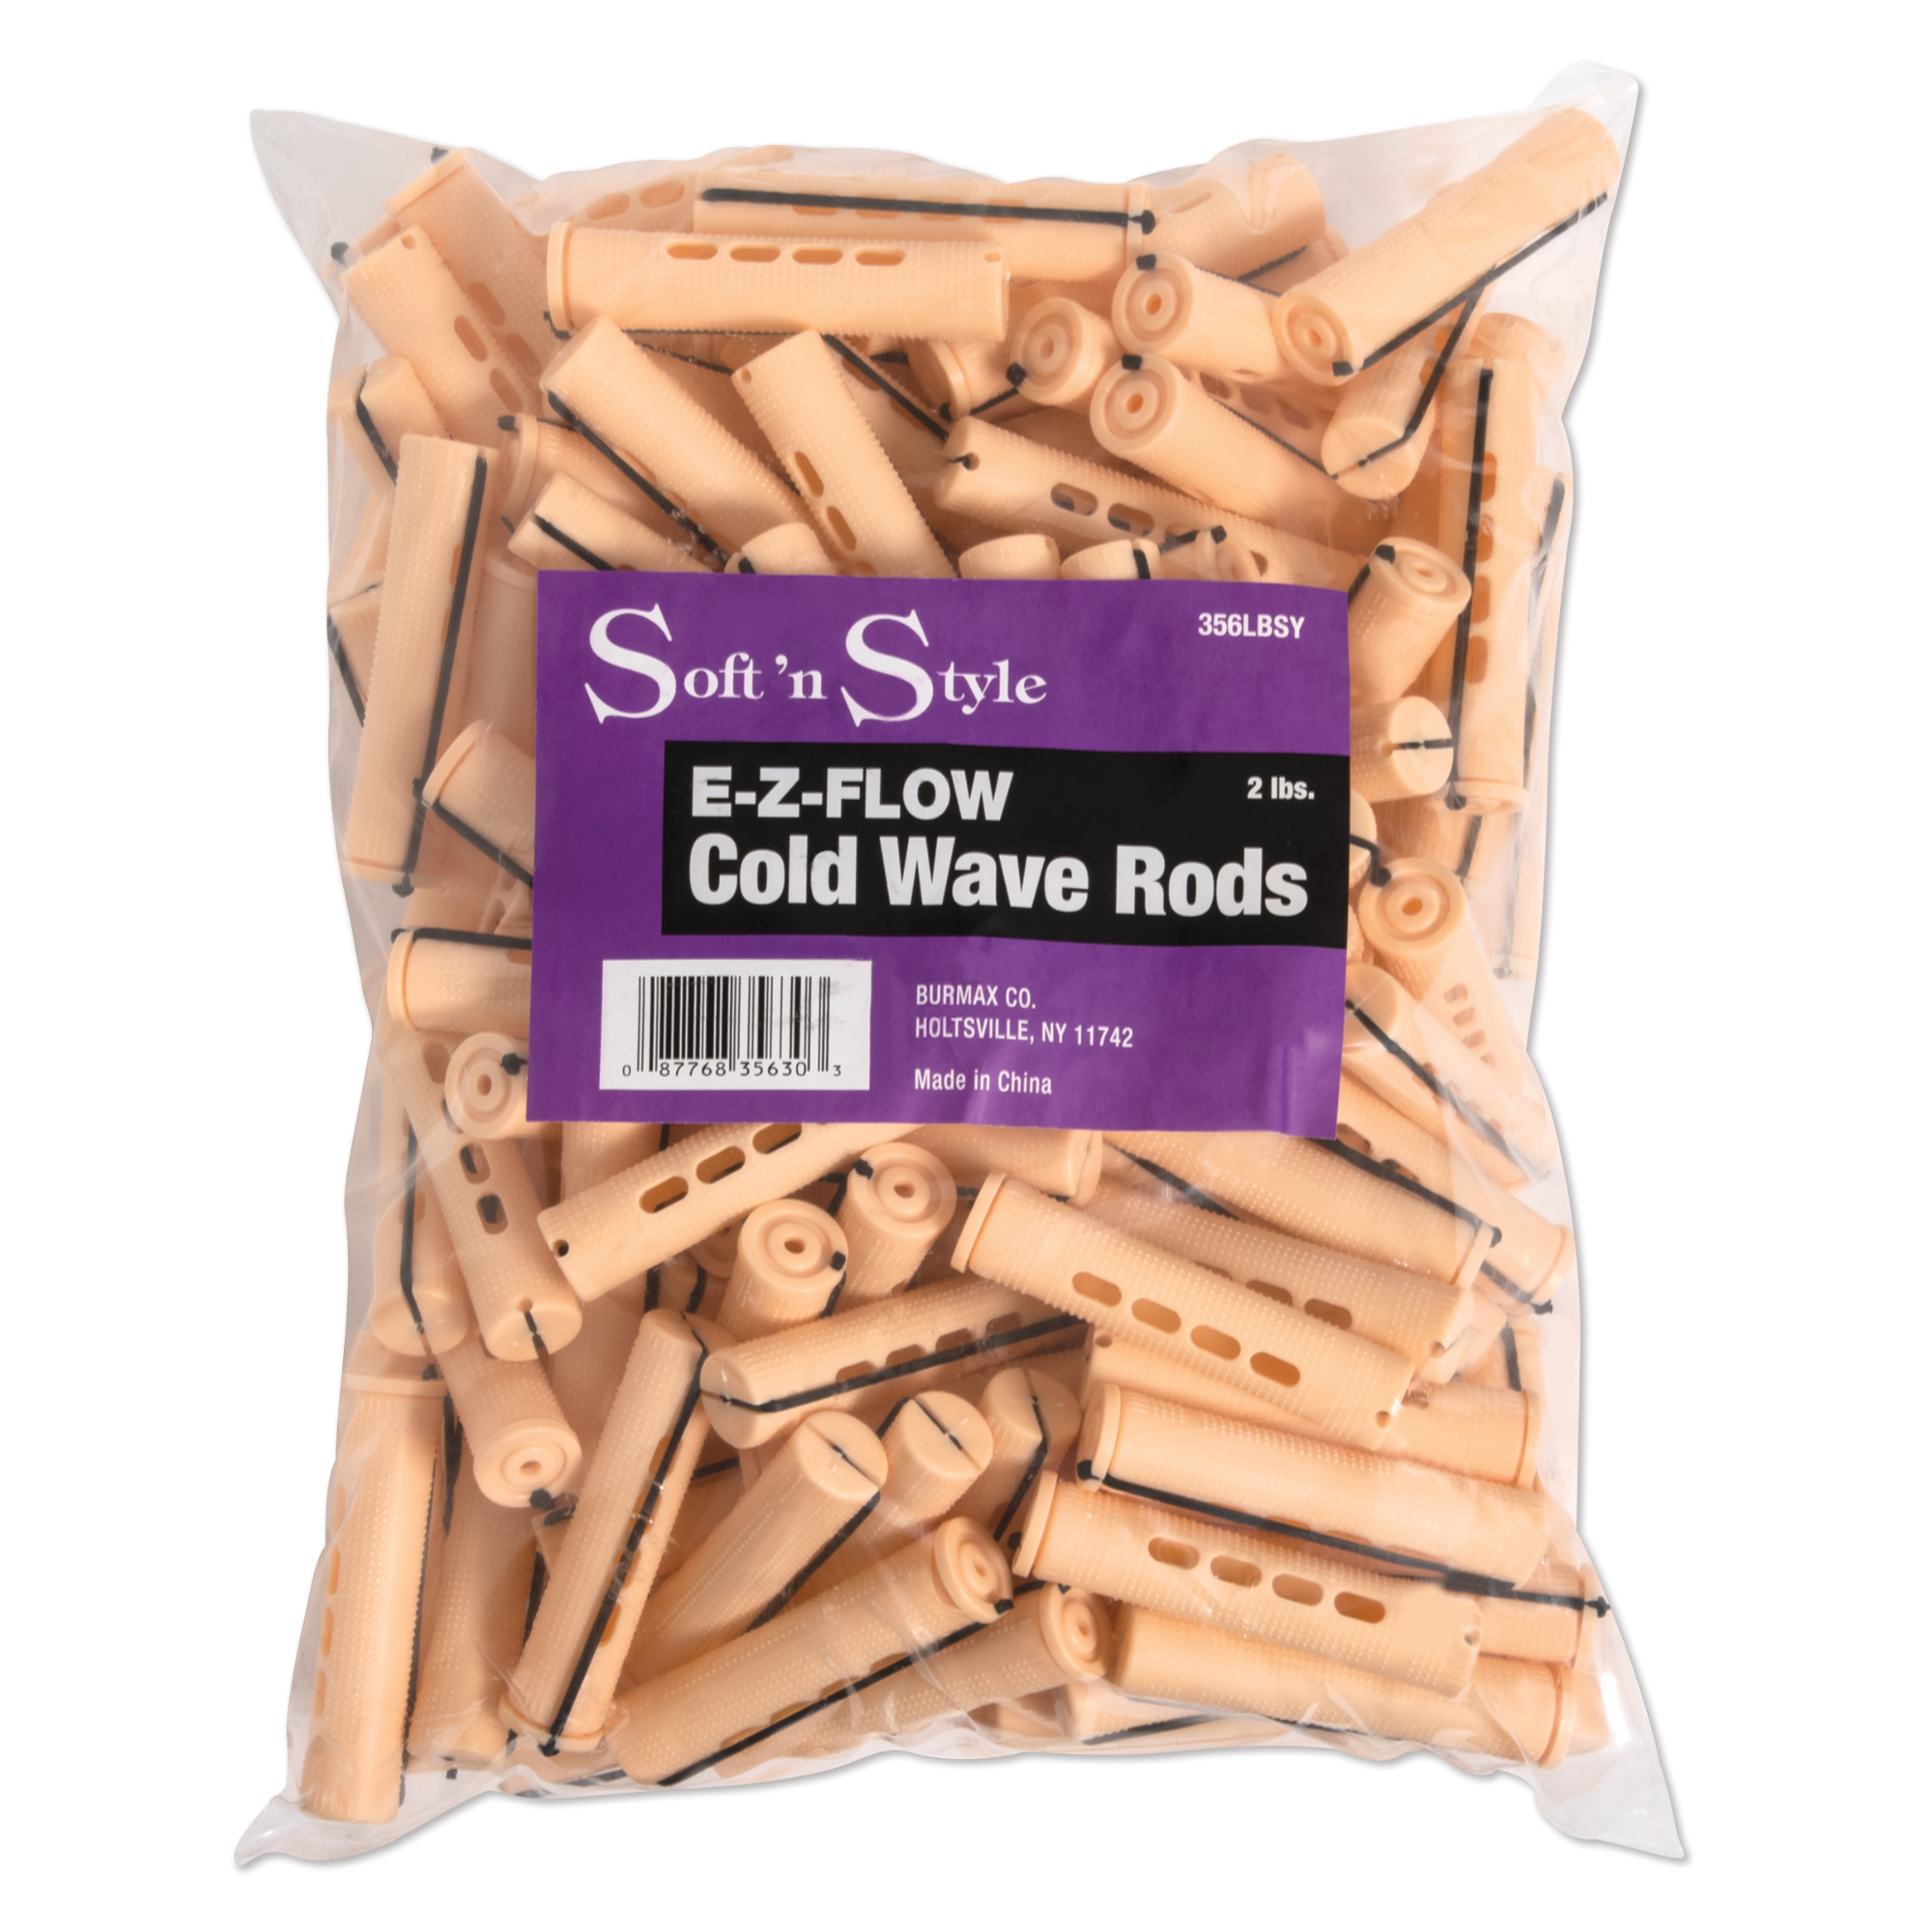 Concave Cold Wave Rods, Long Sandy, 2 lbs.